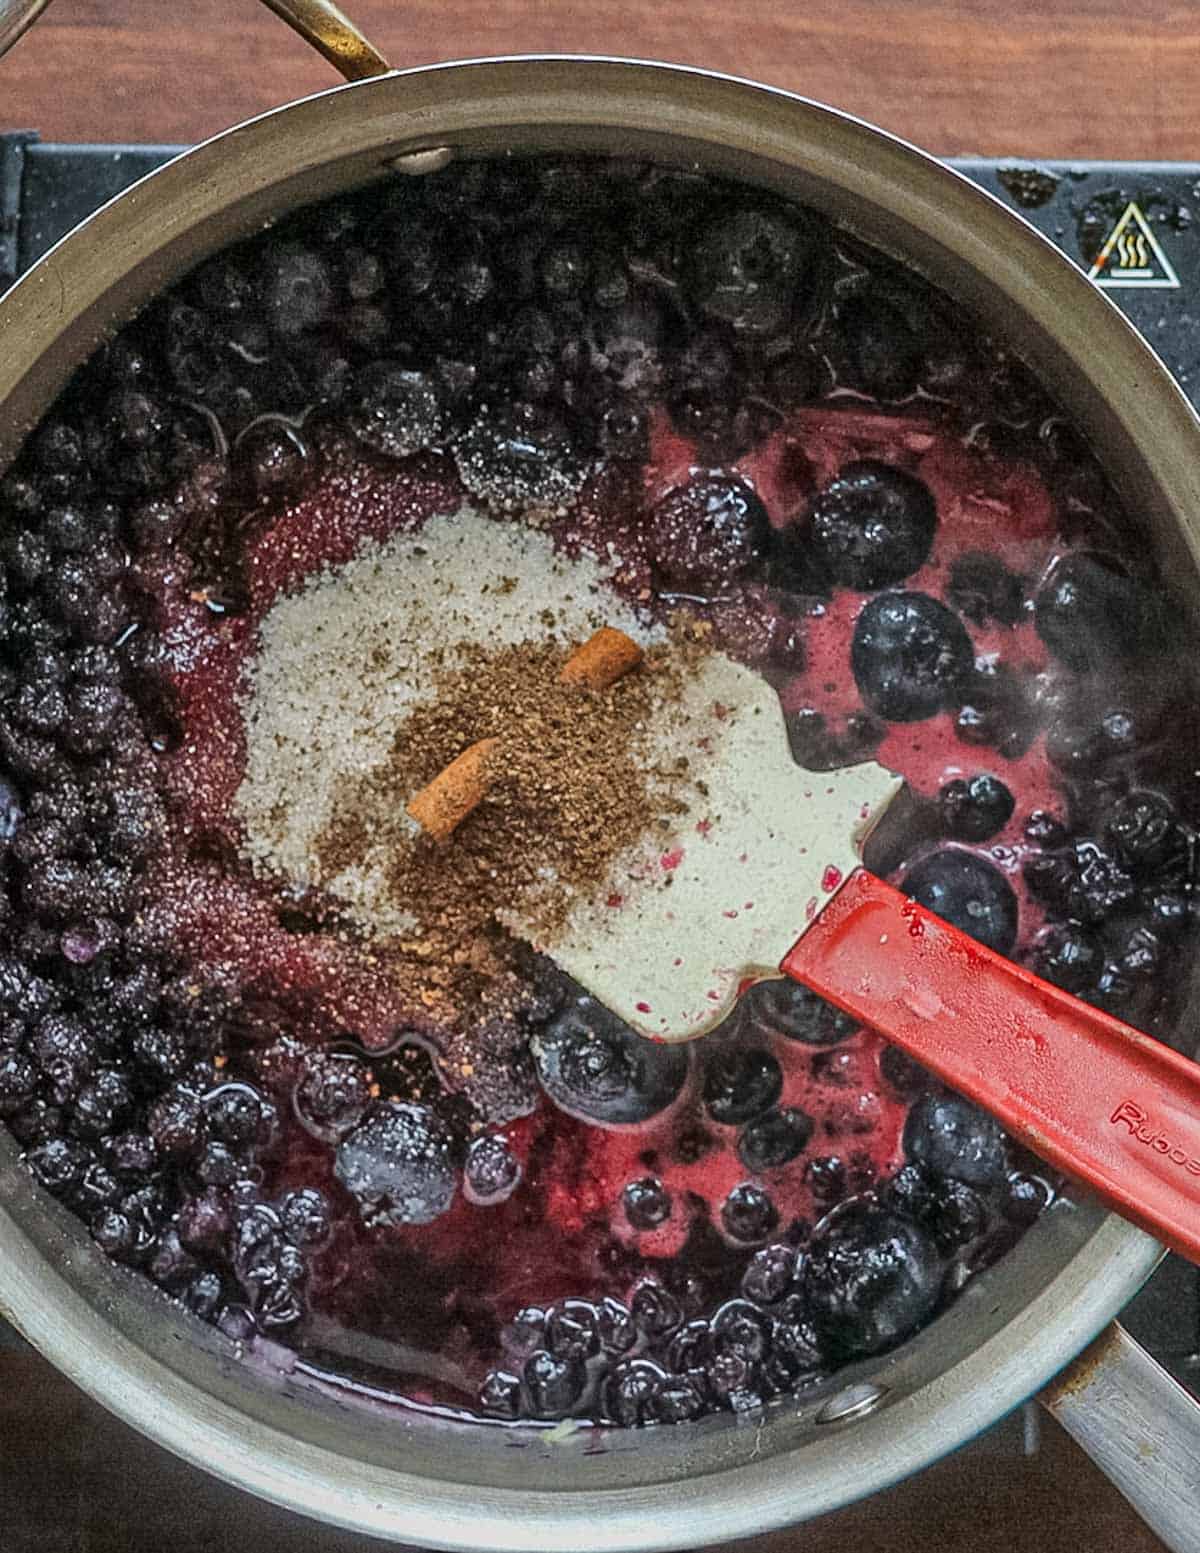 Adding ground allspice to a pan of cooking blueberry sauce.